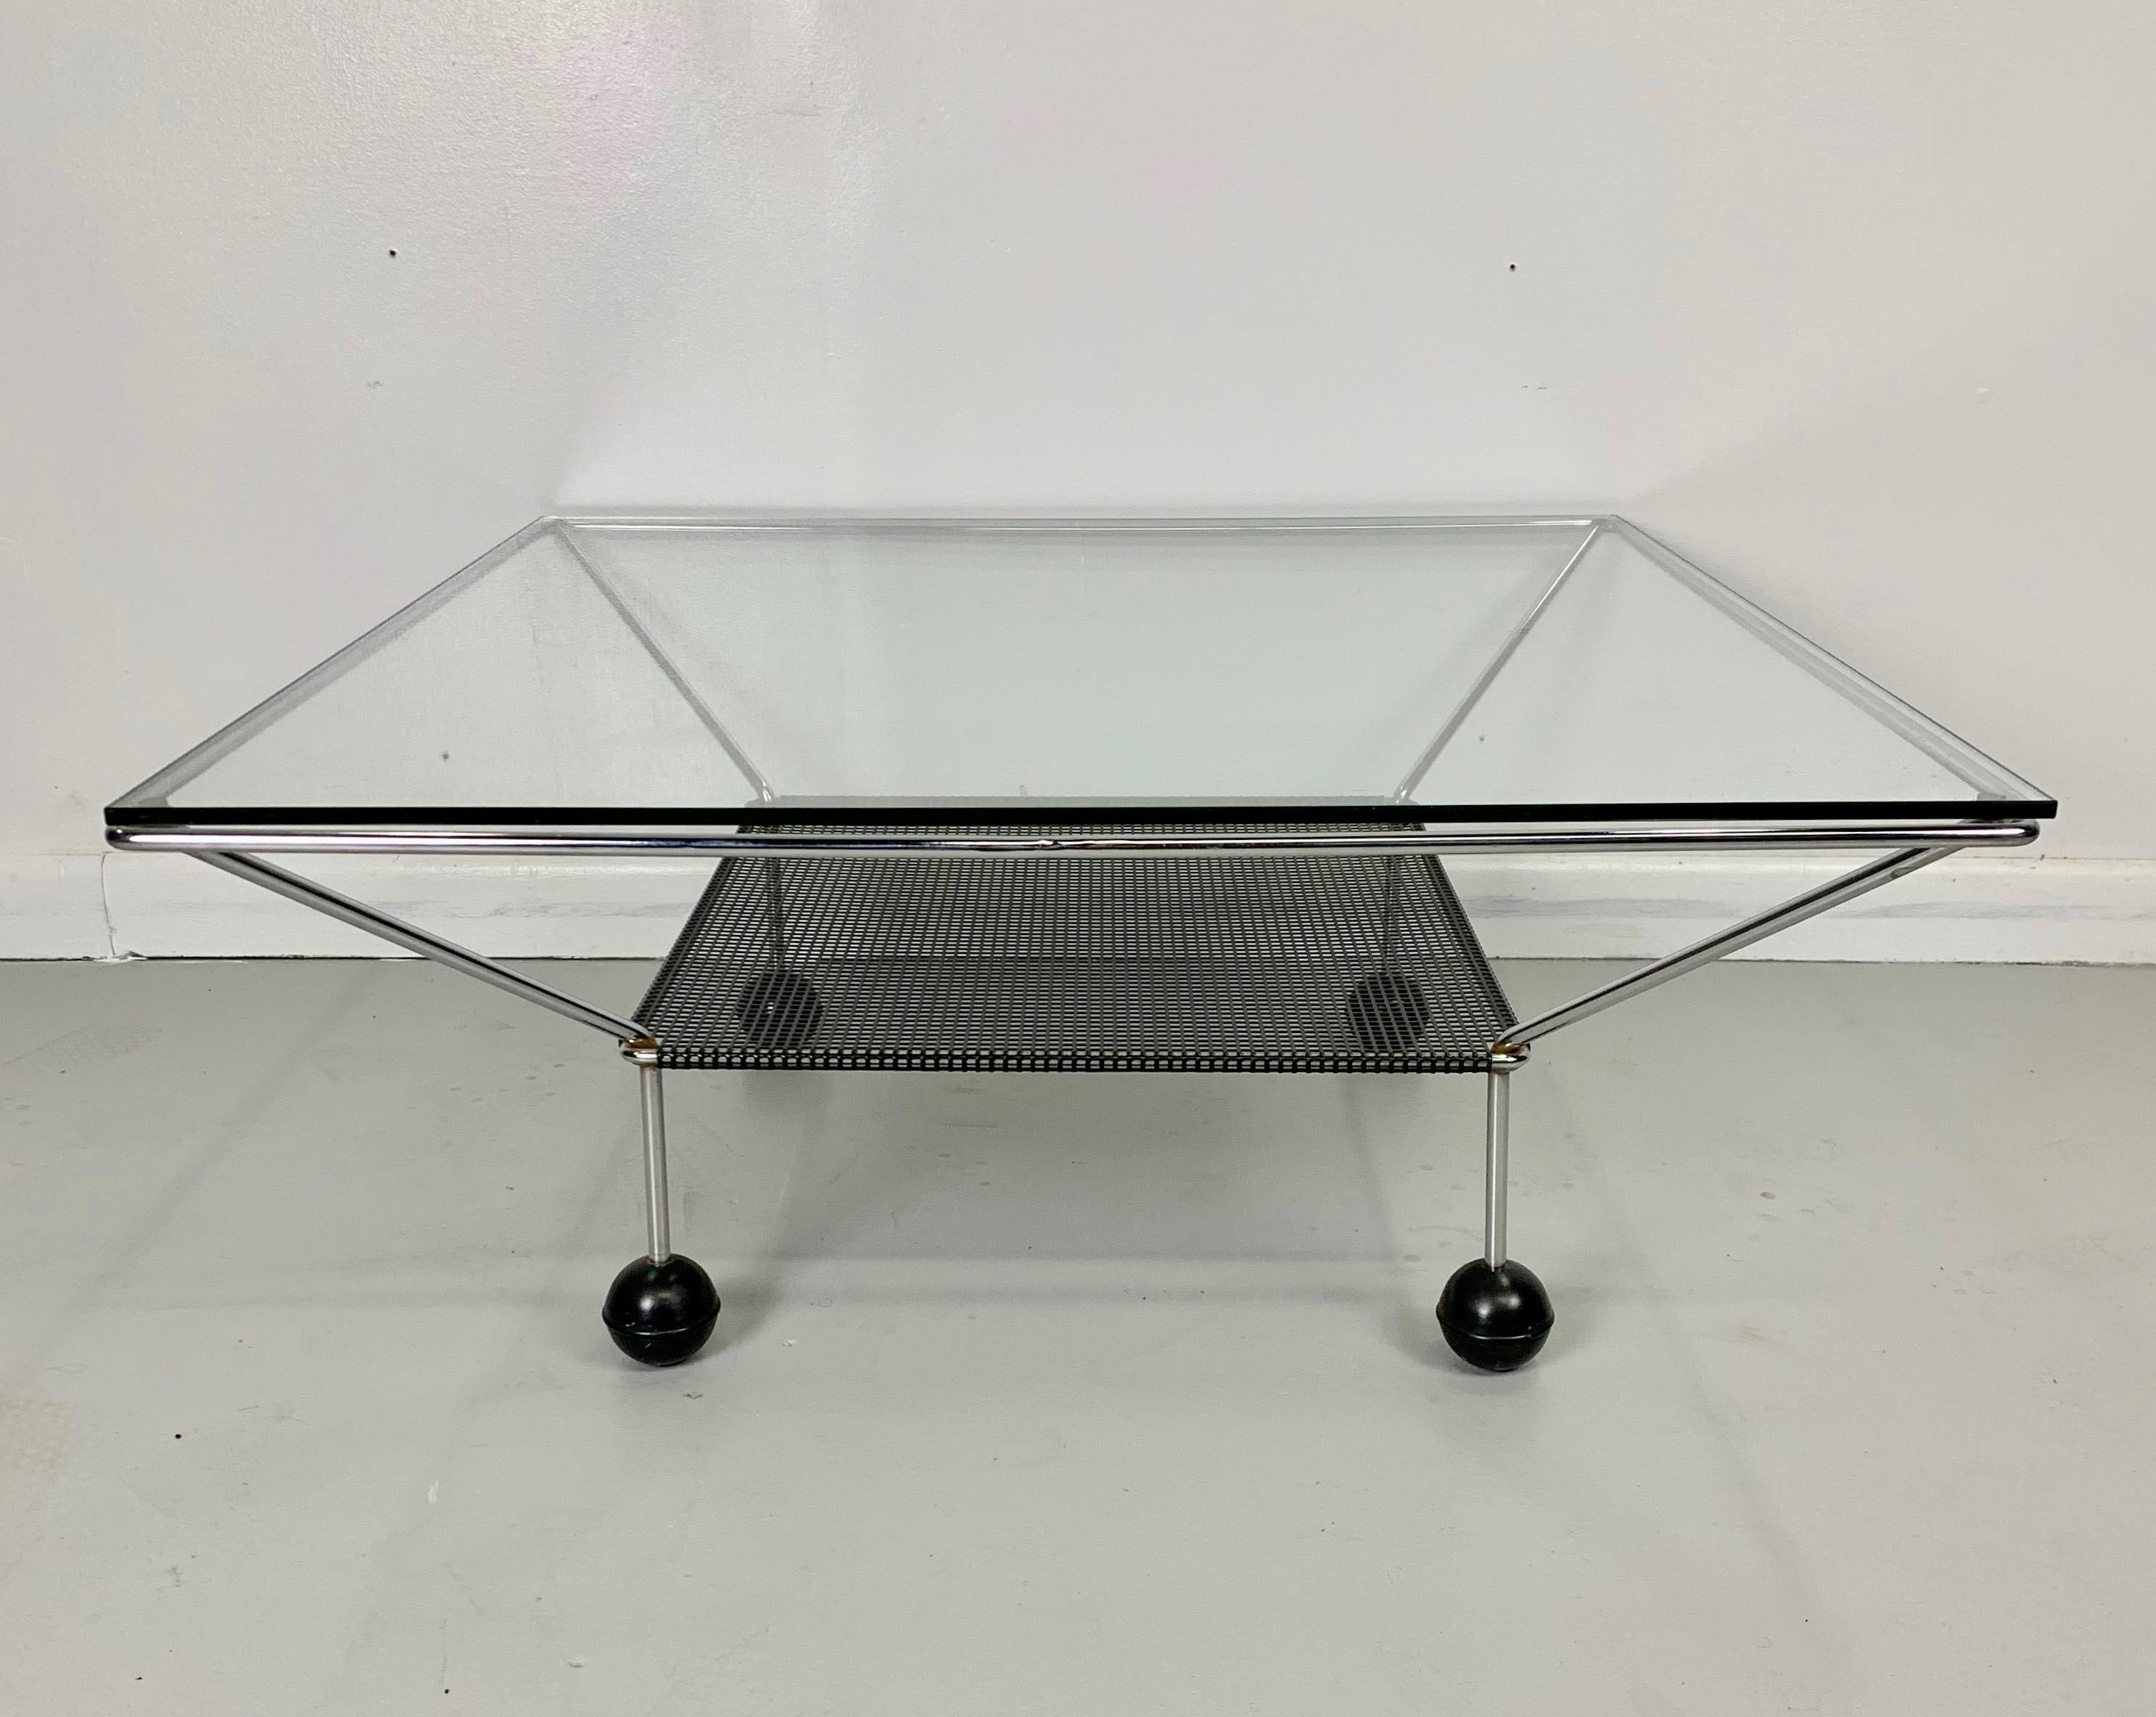 Unique table consisting of a chrome frame sitting on black ball feet with a perforated metal shelf.
This table was produced in the era of the Postmodernists such as Sottsass, de Lucchi, Graves, Shire and others.